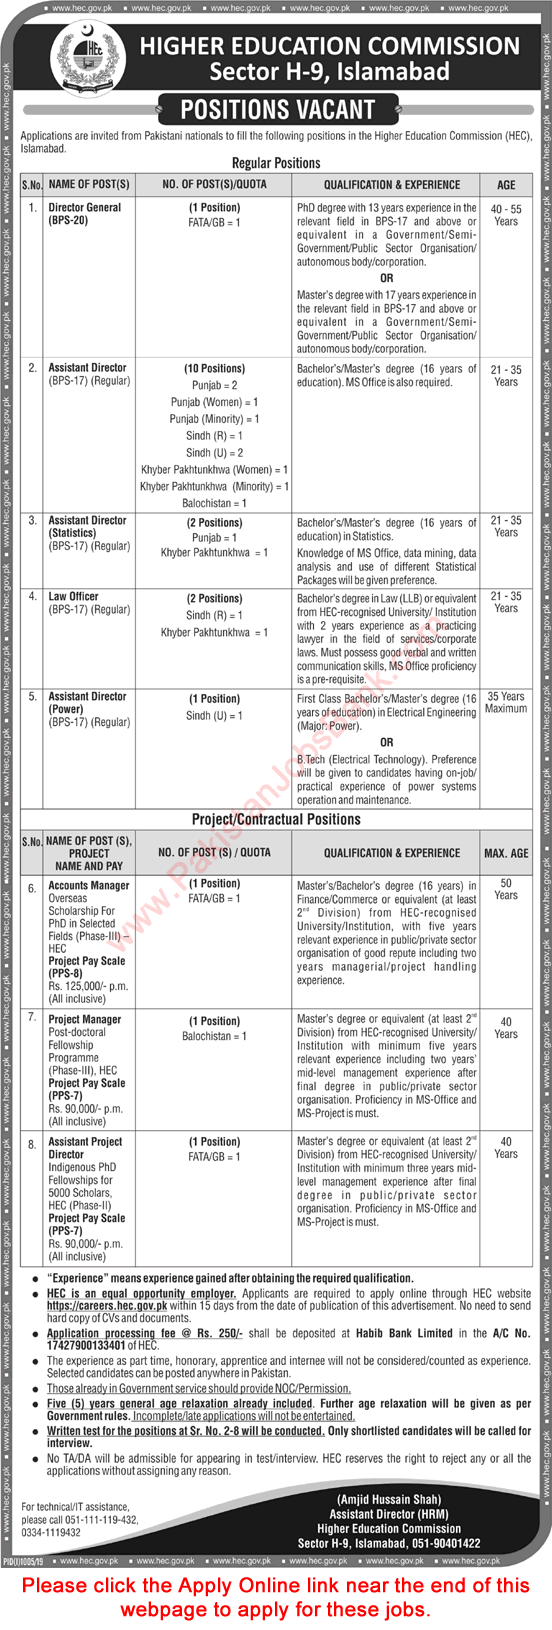 HEC Jobs August 2019 Apply Online Assistant Directors & Others Higher Education Commission Latest